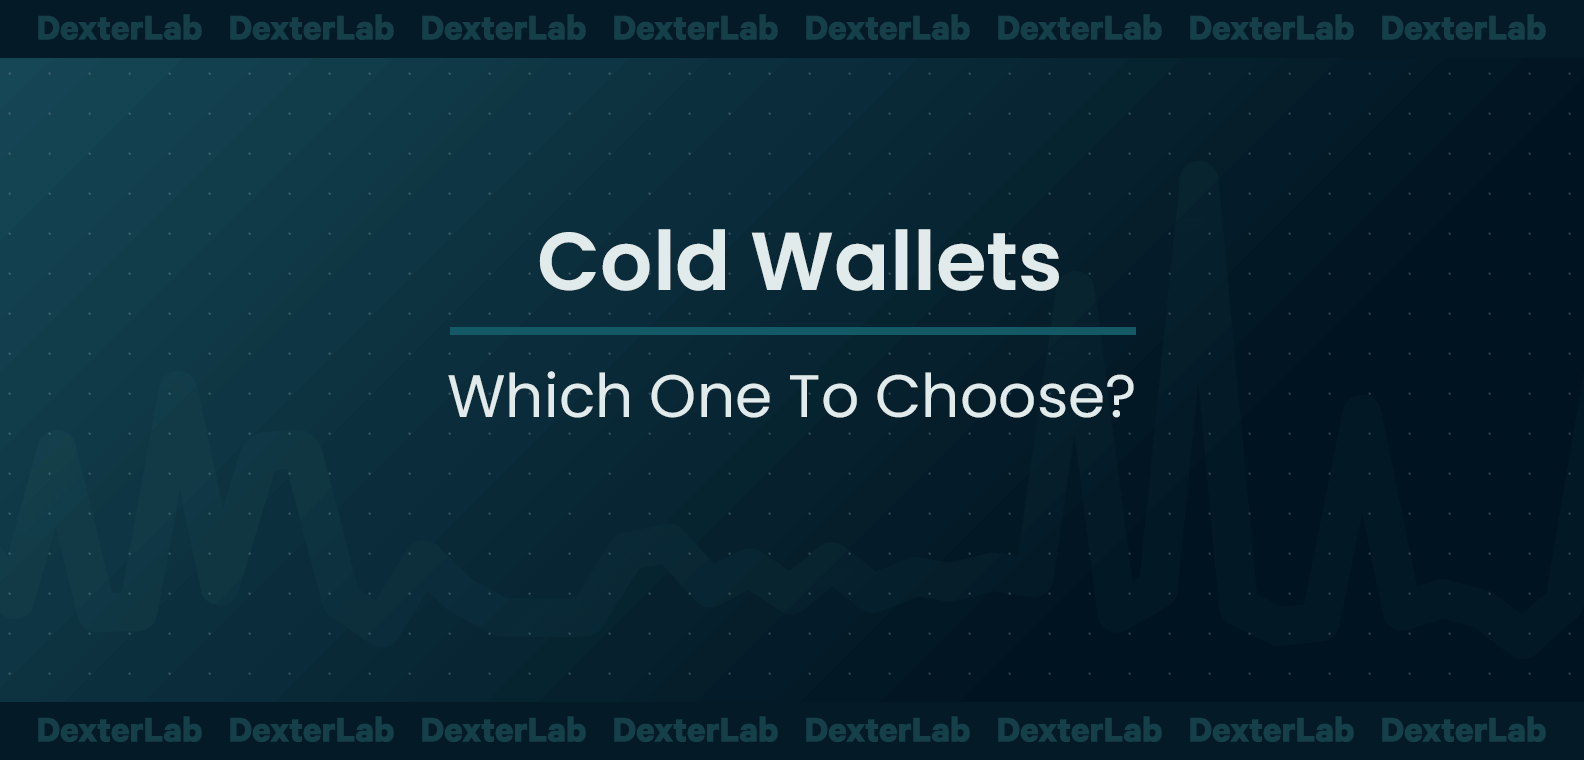 Cold Wallets: Which One To Choose?